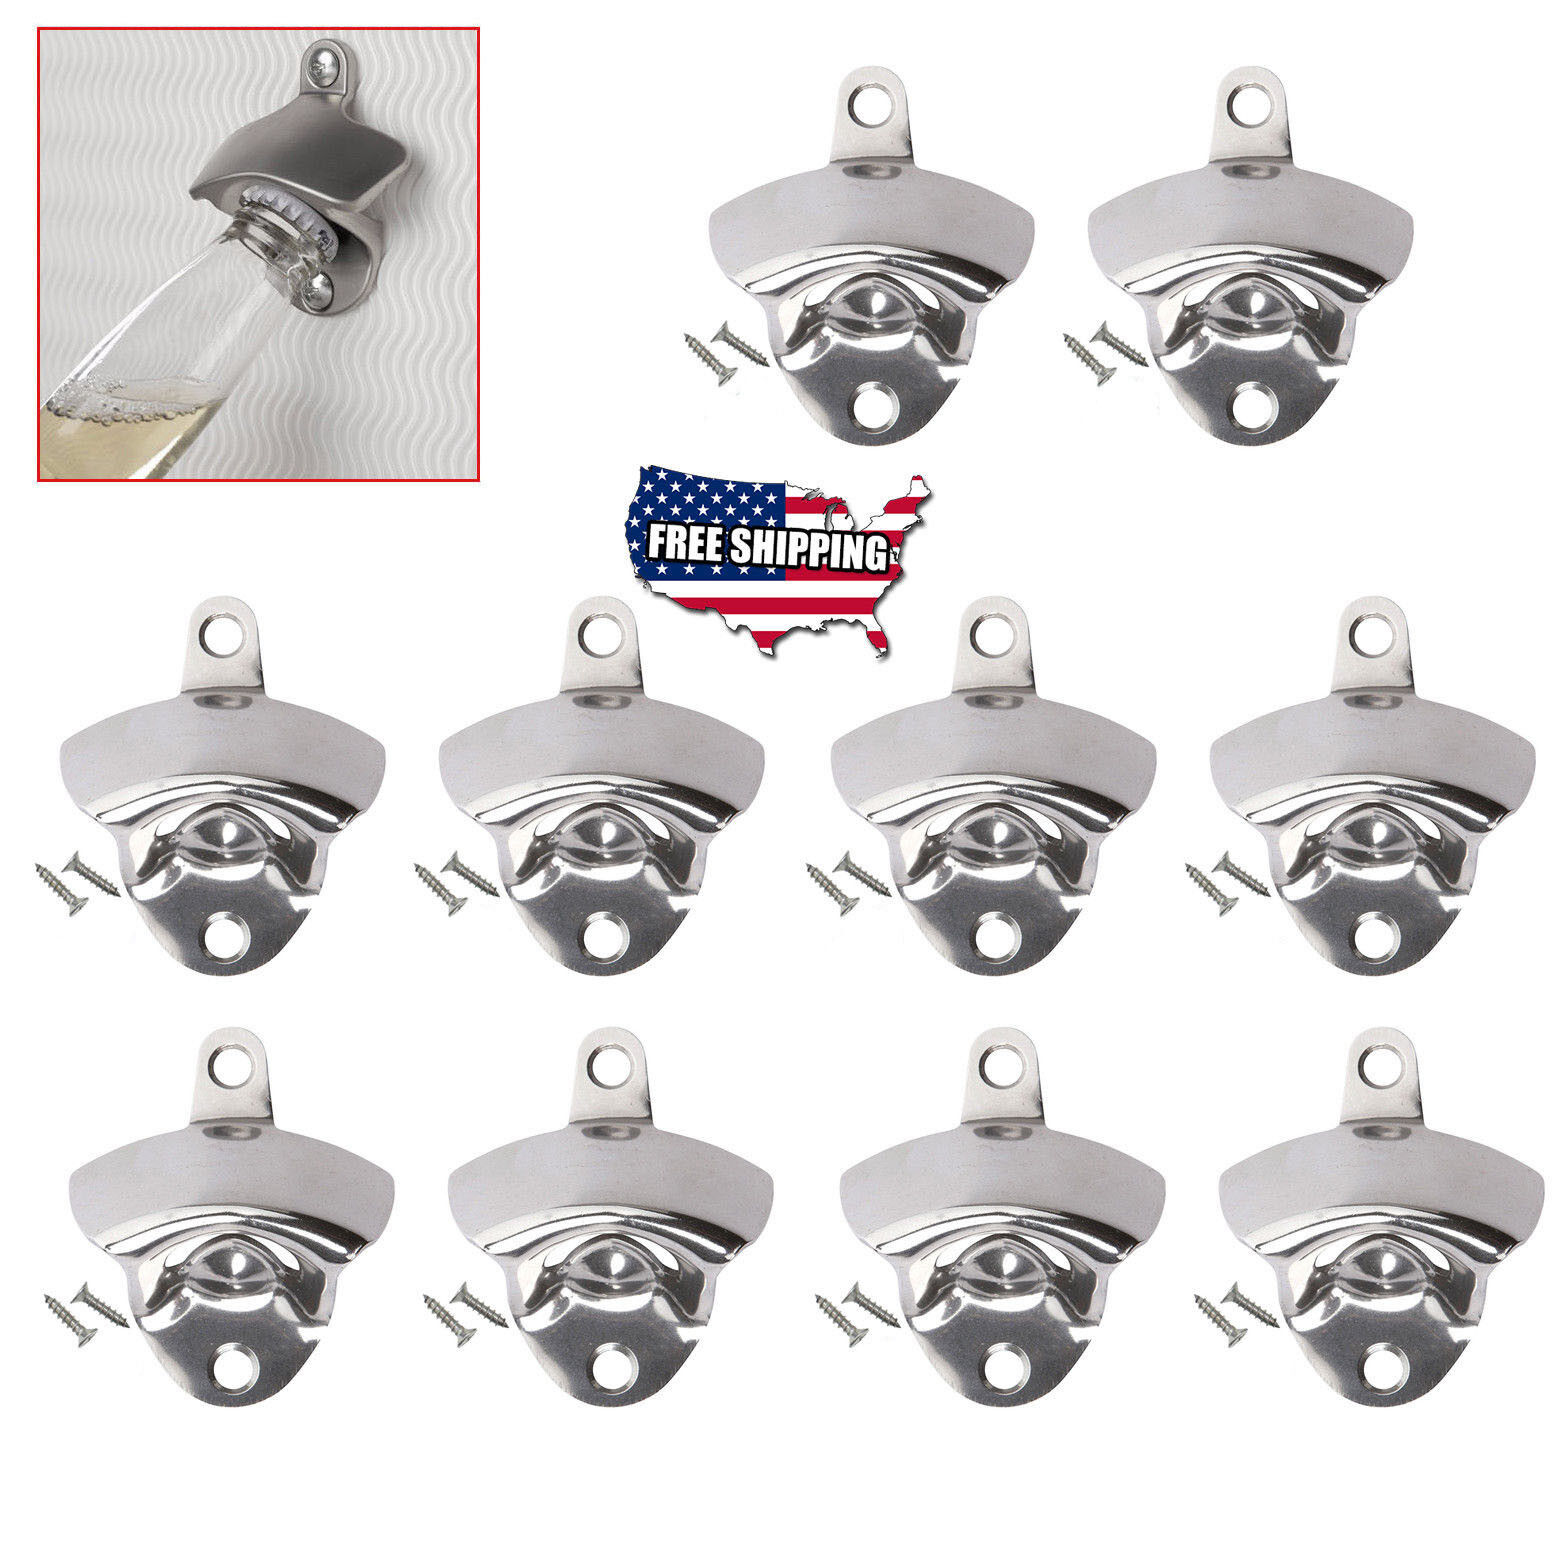 10 pcs NEW Stainless Steel silver Wall Mount Beer soda Bottle Opener with Screws Unbranded